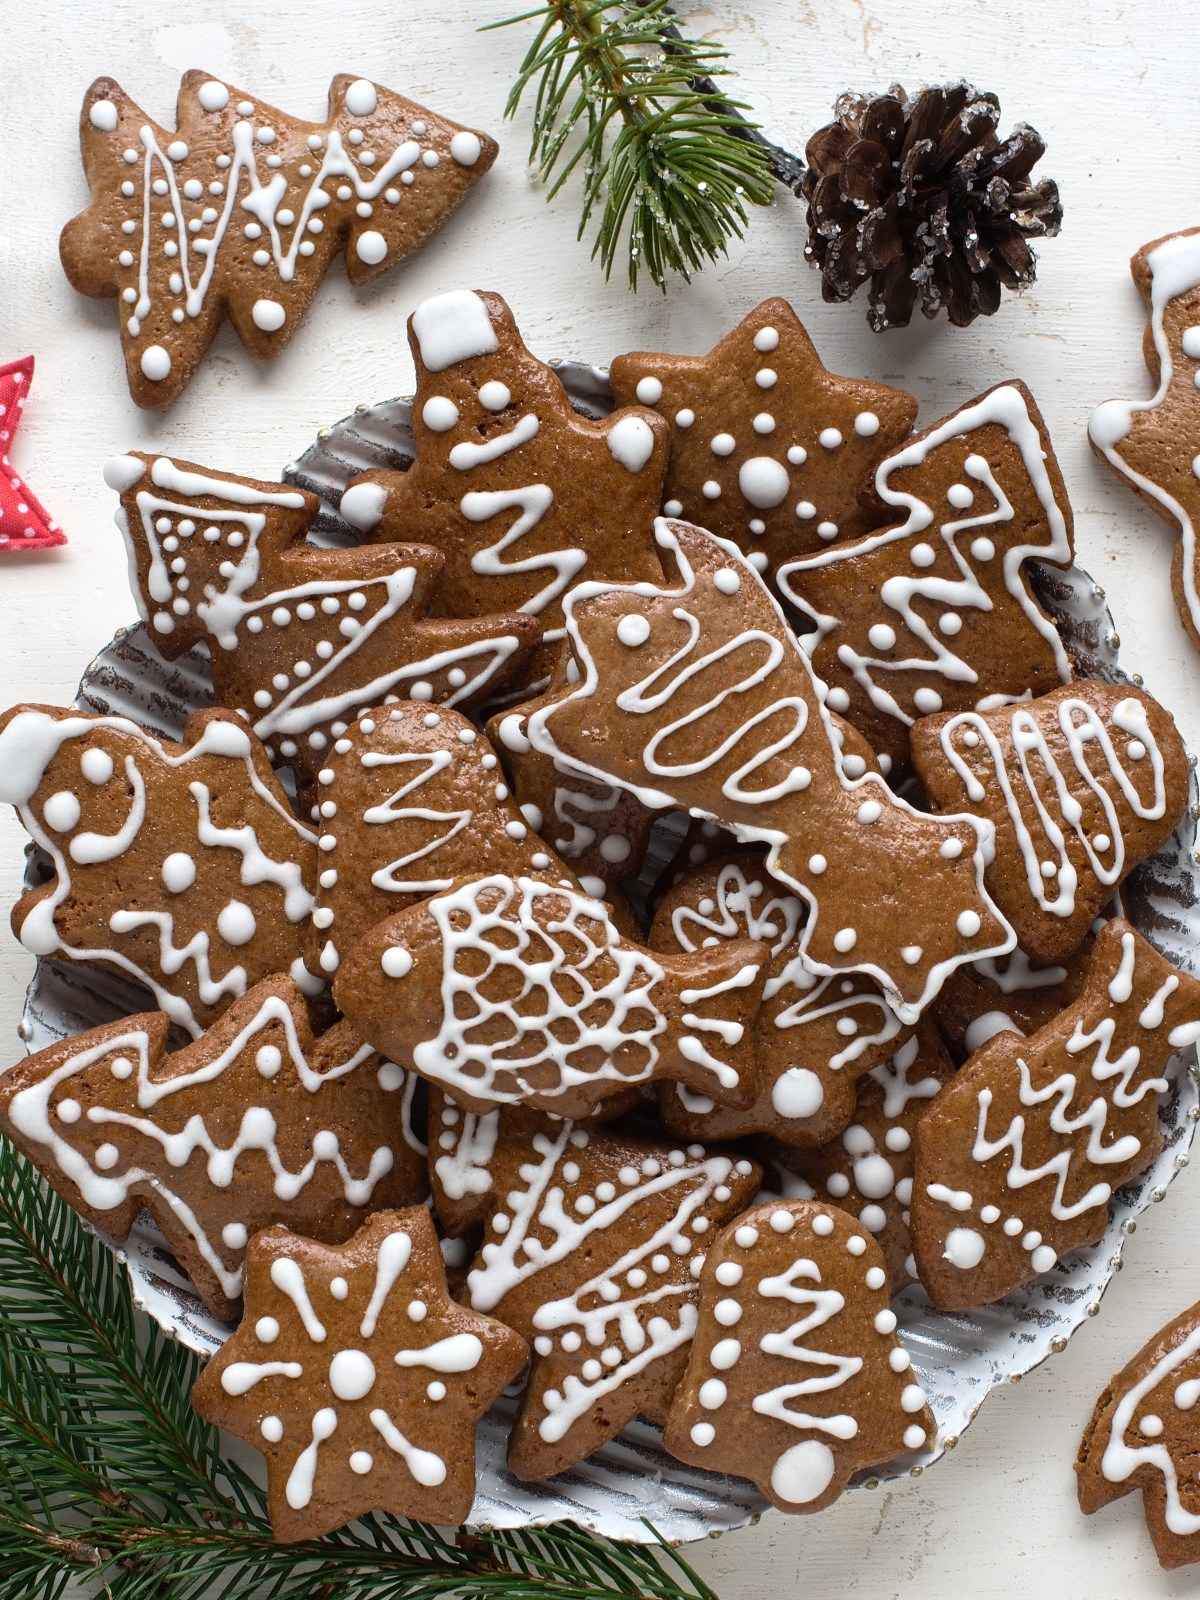 Pernicky Czech gingerbread cookies served on a platter.